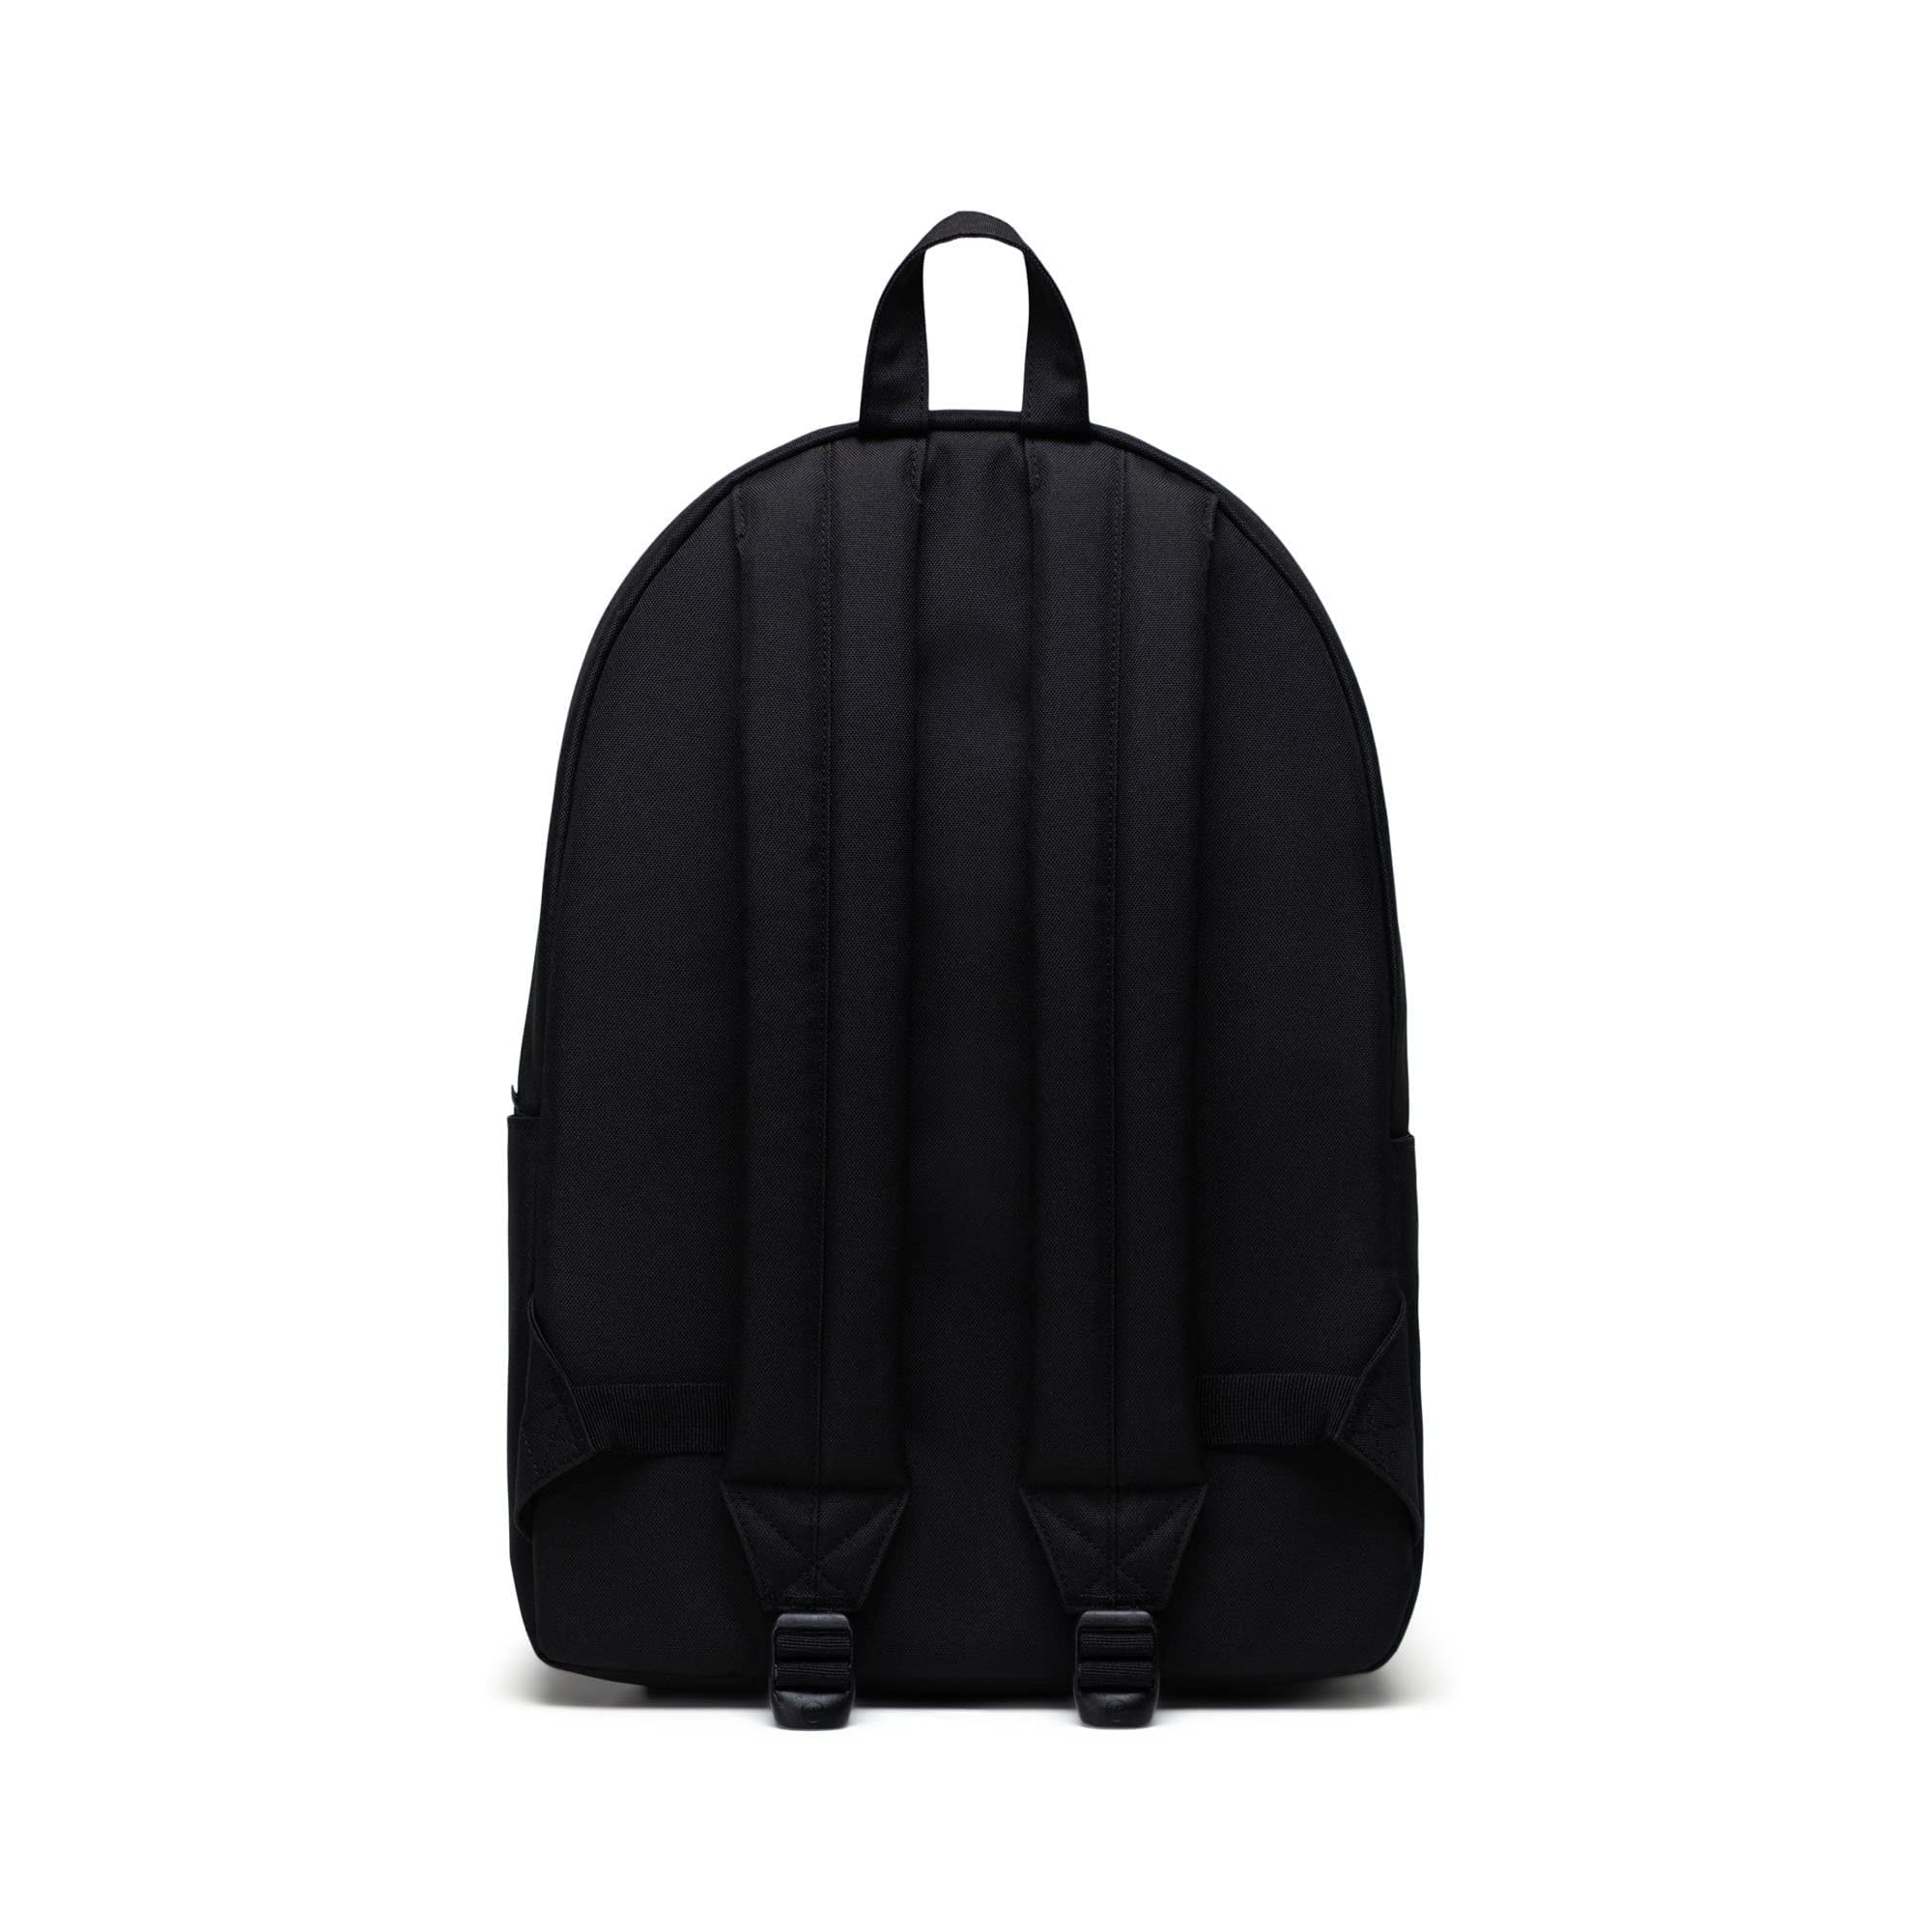 Herschel Supply Co. Classic X-Large Backpack Black/Copen Blue One Size